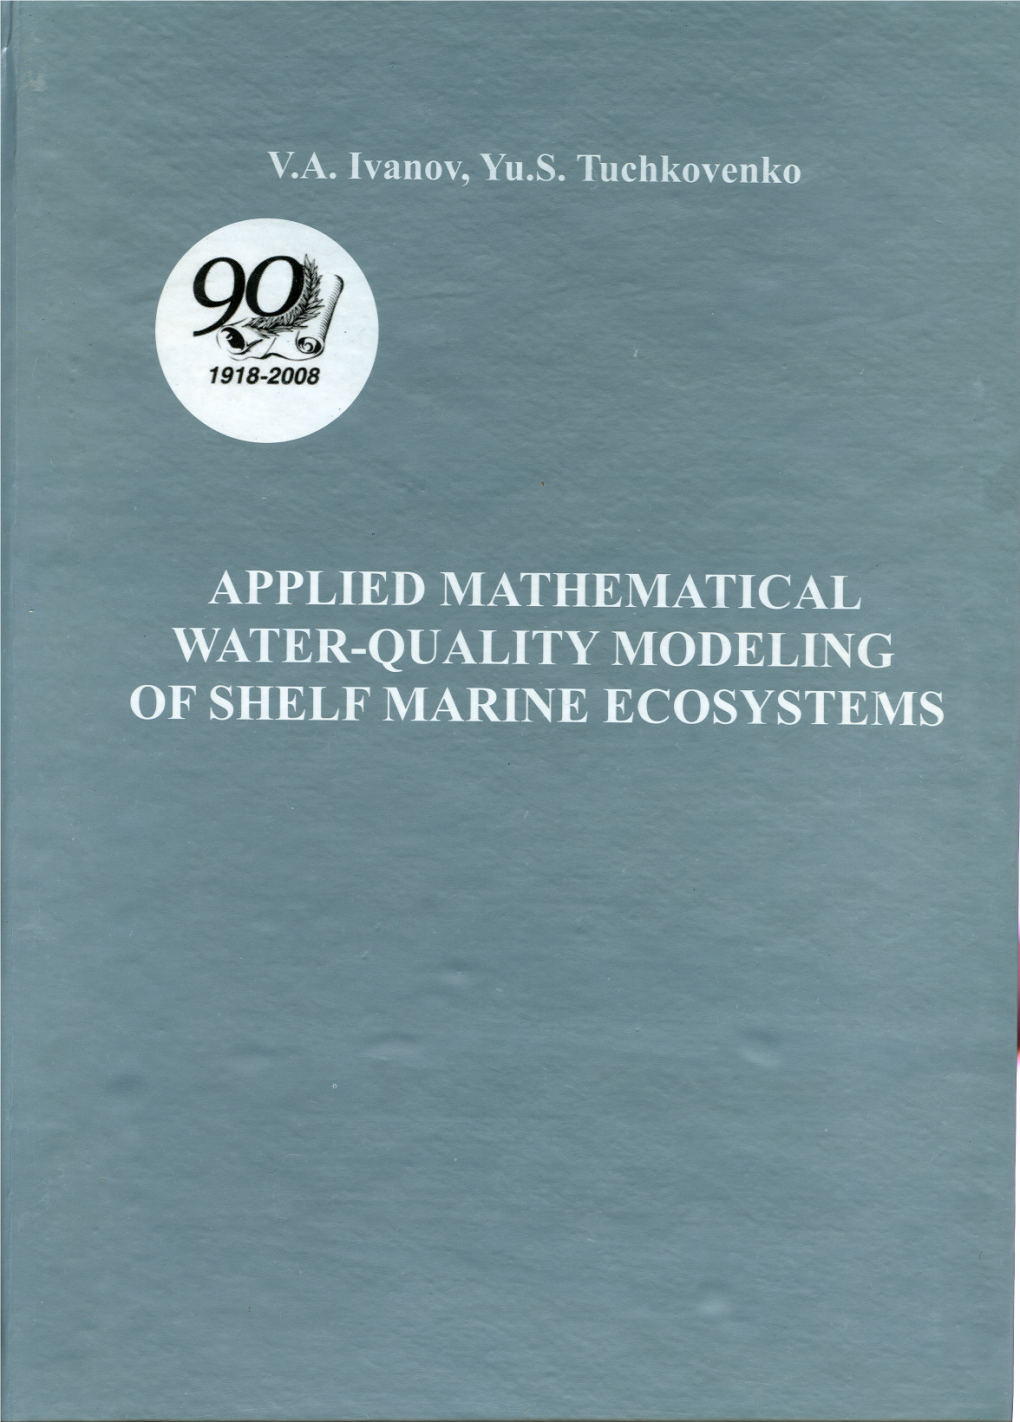 Applied Mathematical Water-Quality Modeling of Shelf Marine Ecosystems